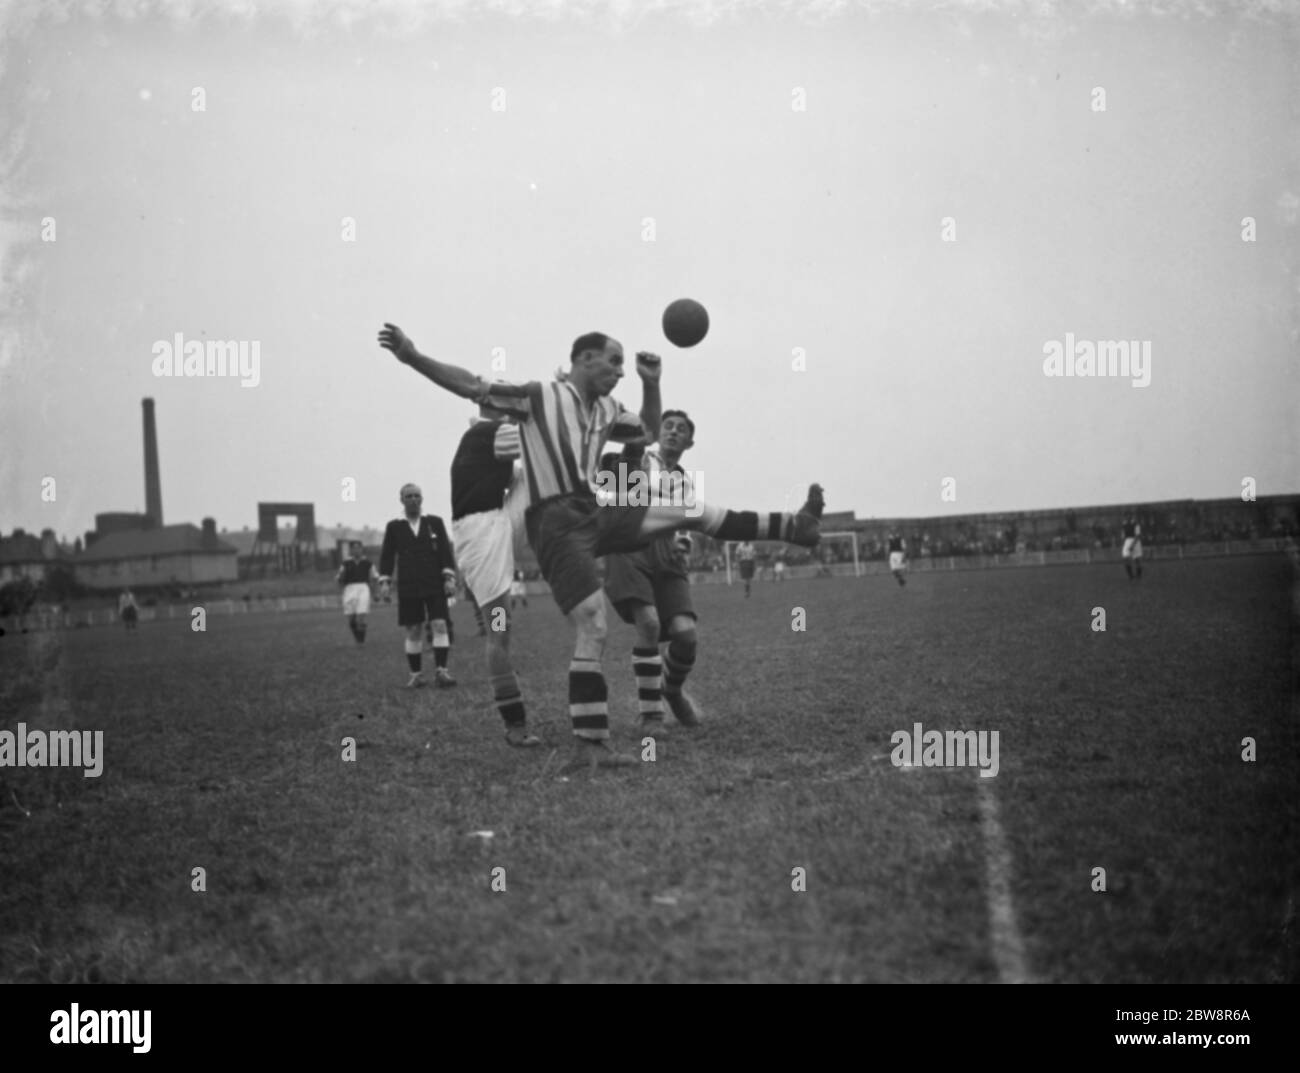 Dartford reserves vs. Ashford Town - Kent League - 03/09/38 . Two players compete for the ball . 1938 Stock Photo